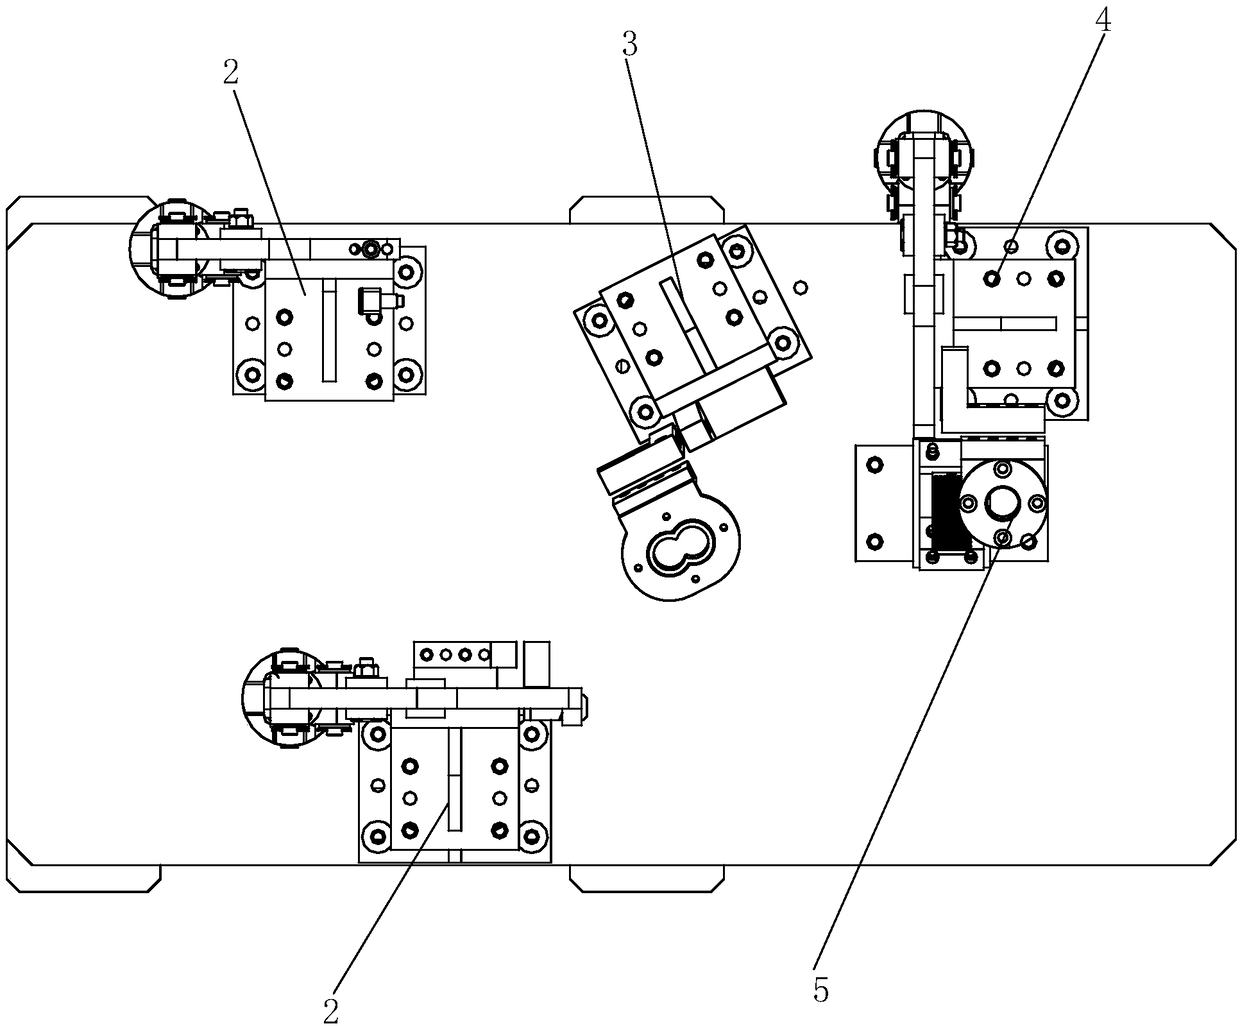 A fixture for auto parts with irregular cylinders